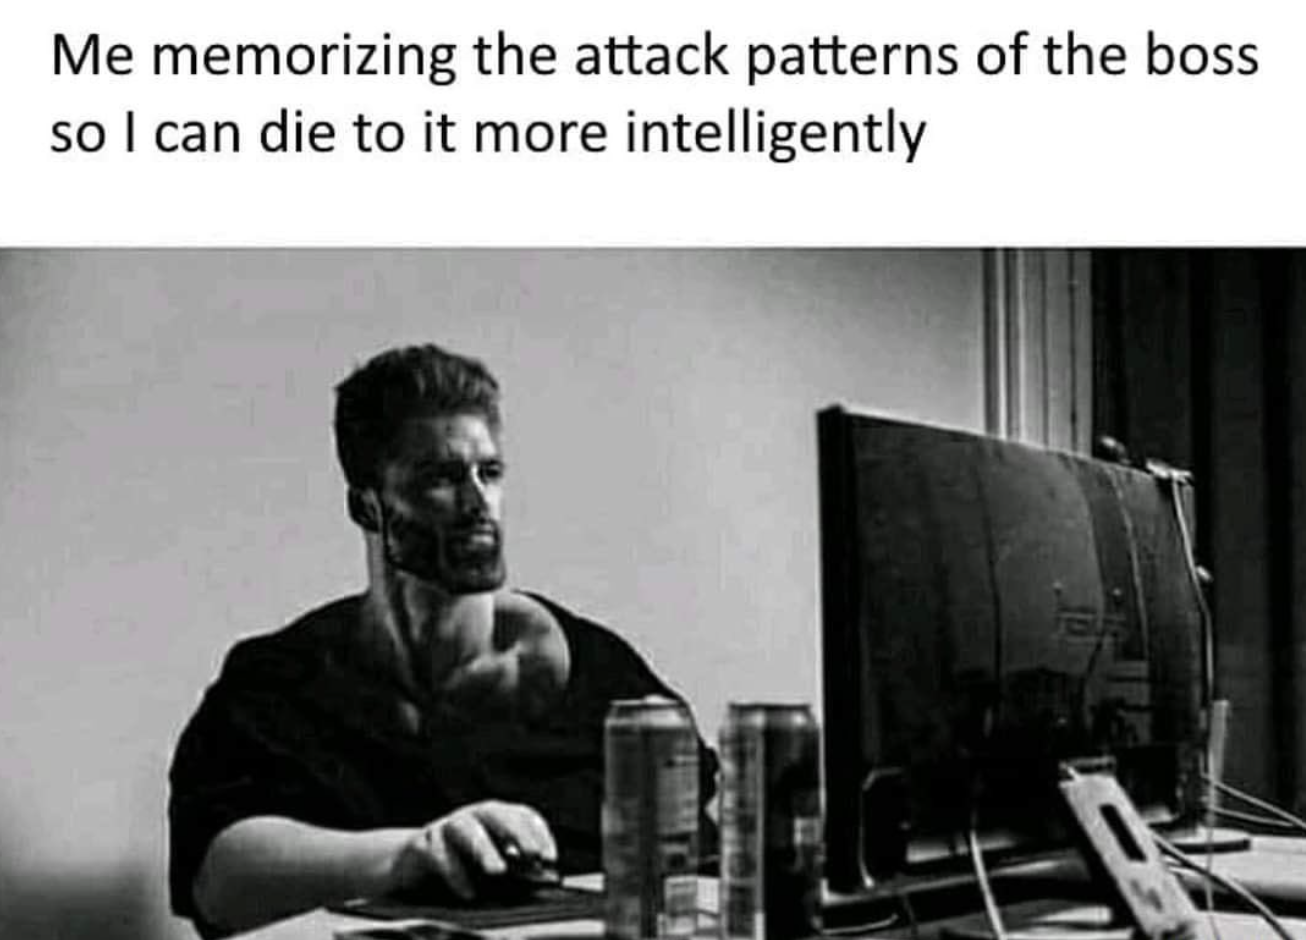 funny gaming memes - me learning the histories cultures and languages - Me memorizing the attack patterns of the boss so I can die to it more intelligently